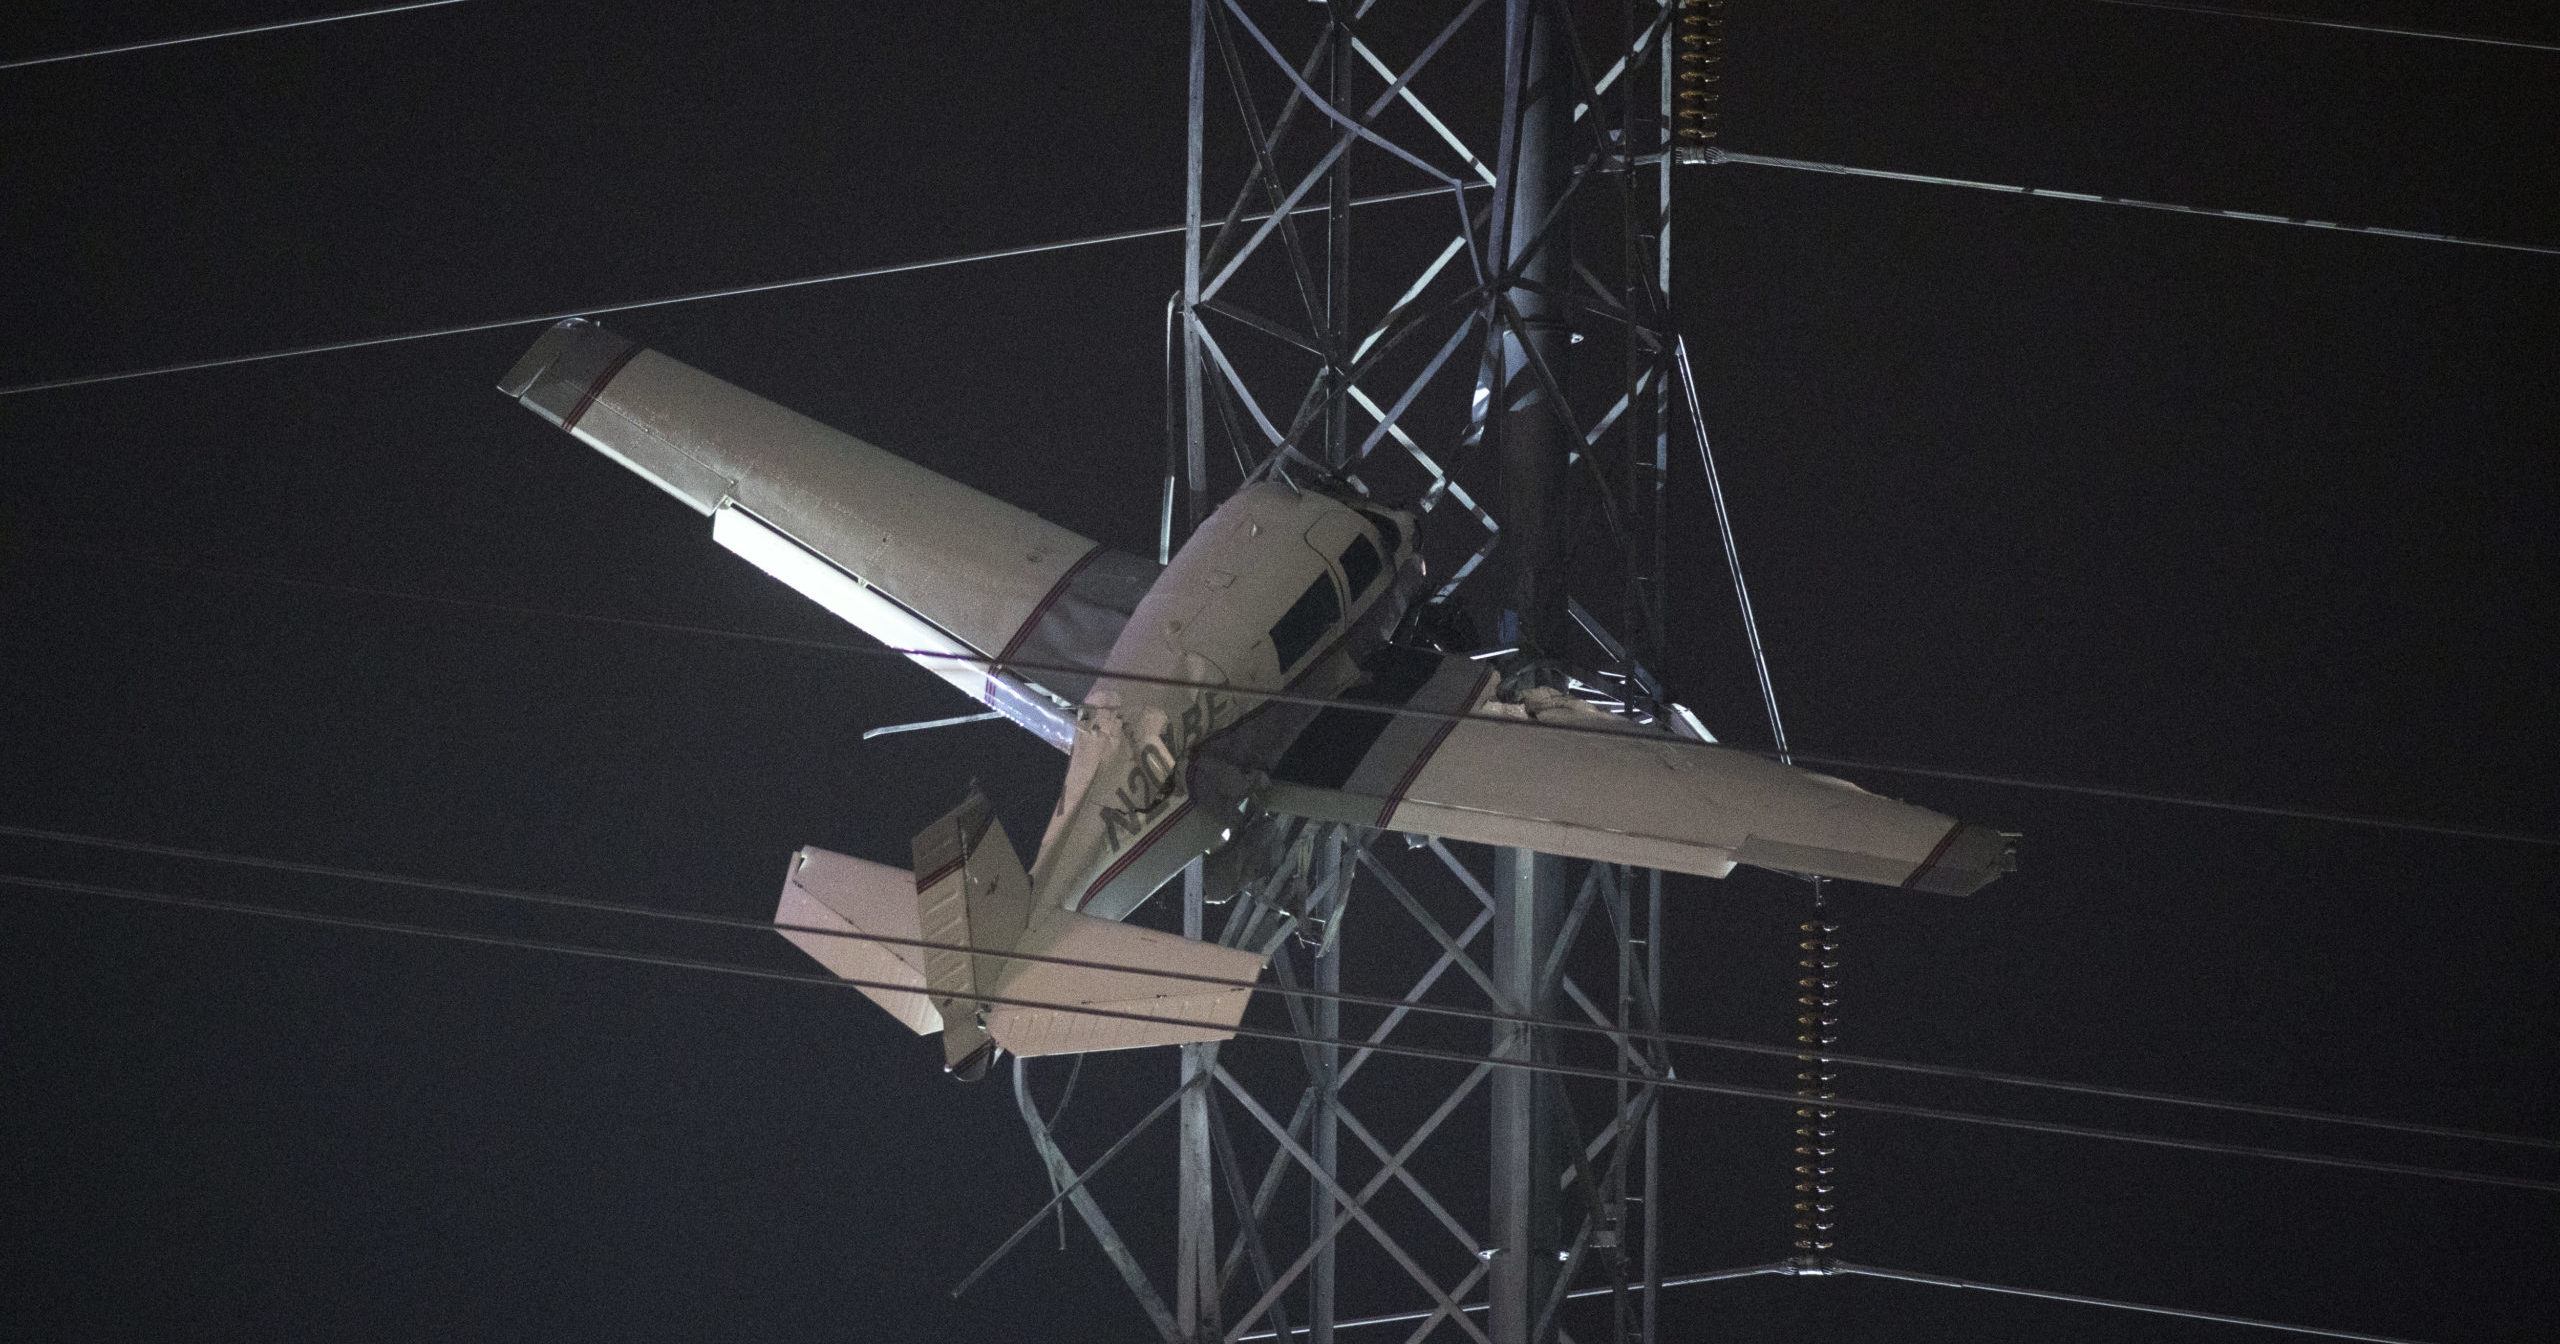 A small plane rests on live power lines after crashing into a tower in Montgomery Village, Maryland, on Sunday.